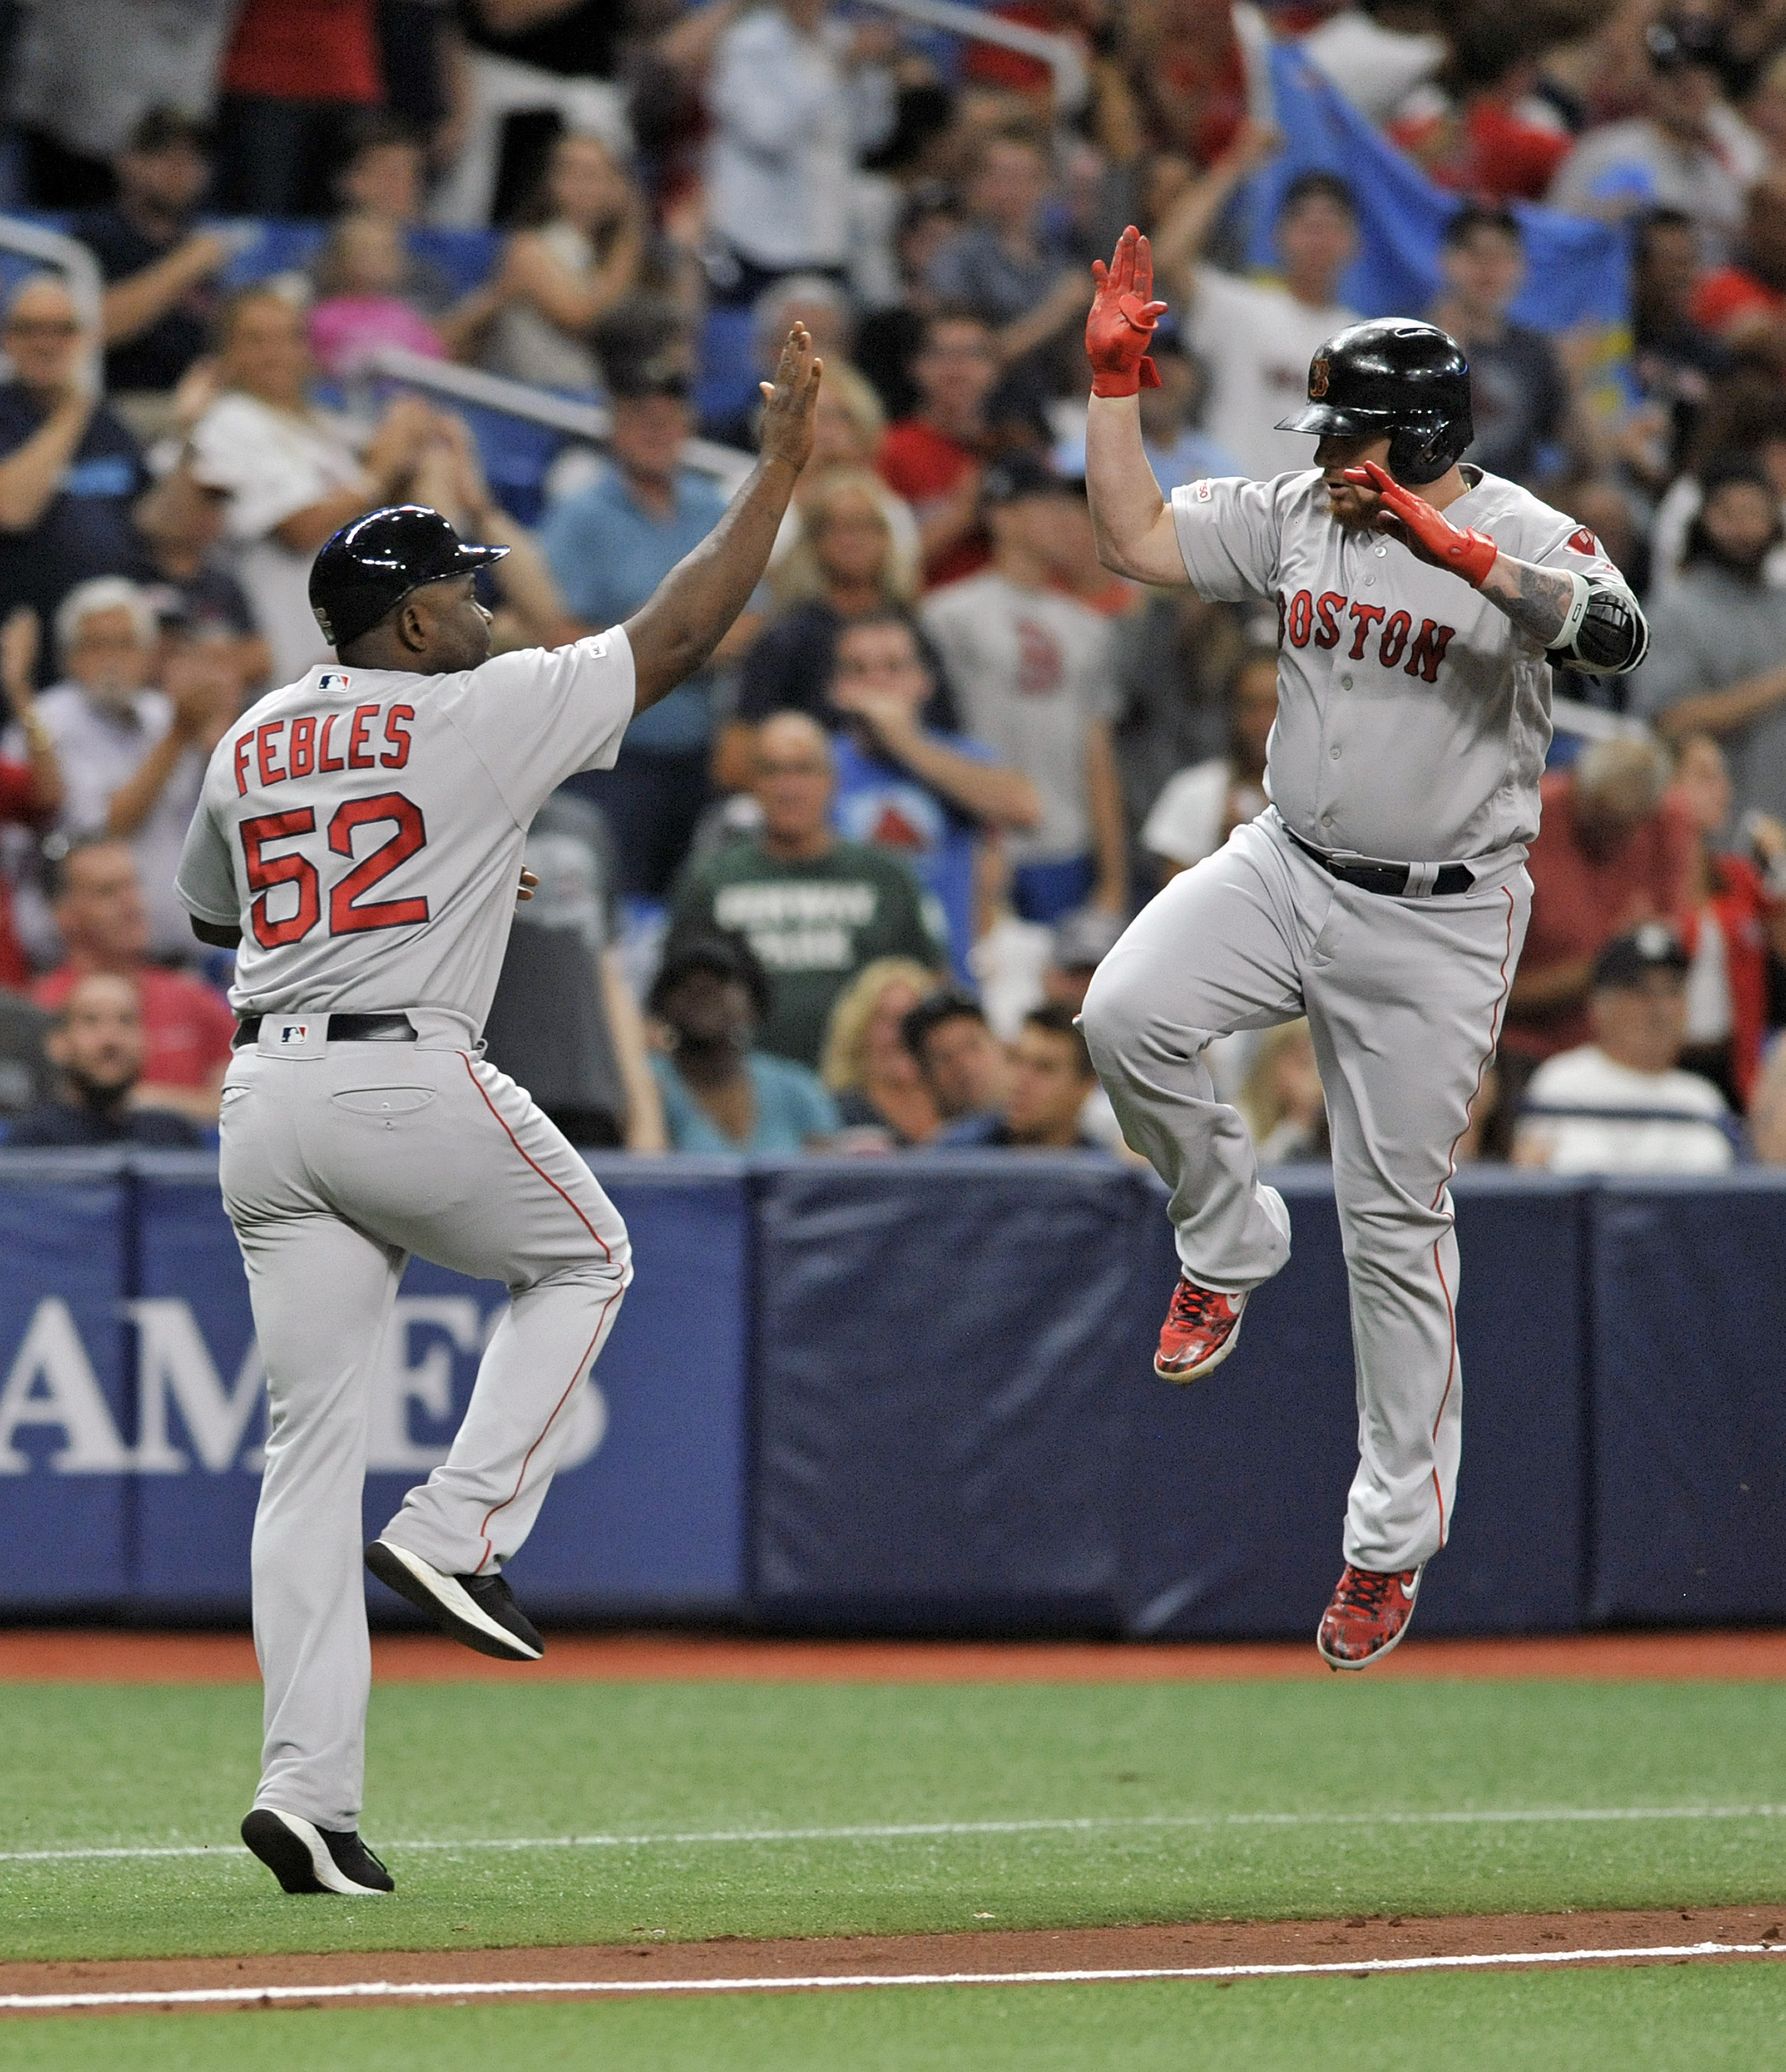 Boston beats Tampa Bay 5-4, moves into 2nd place in AL East